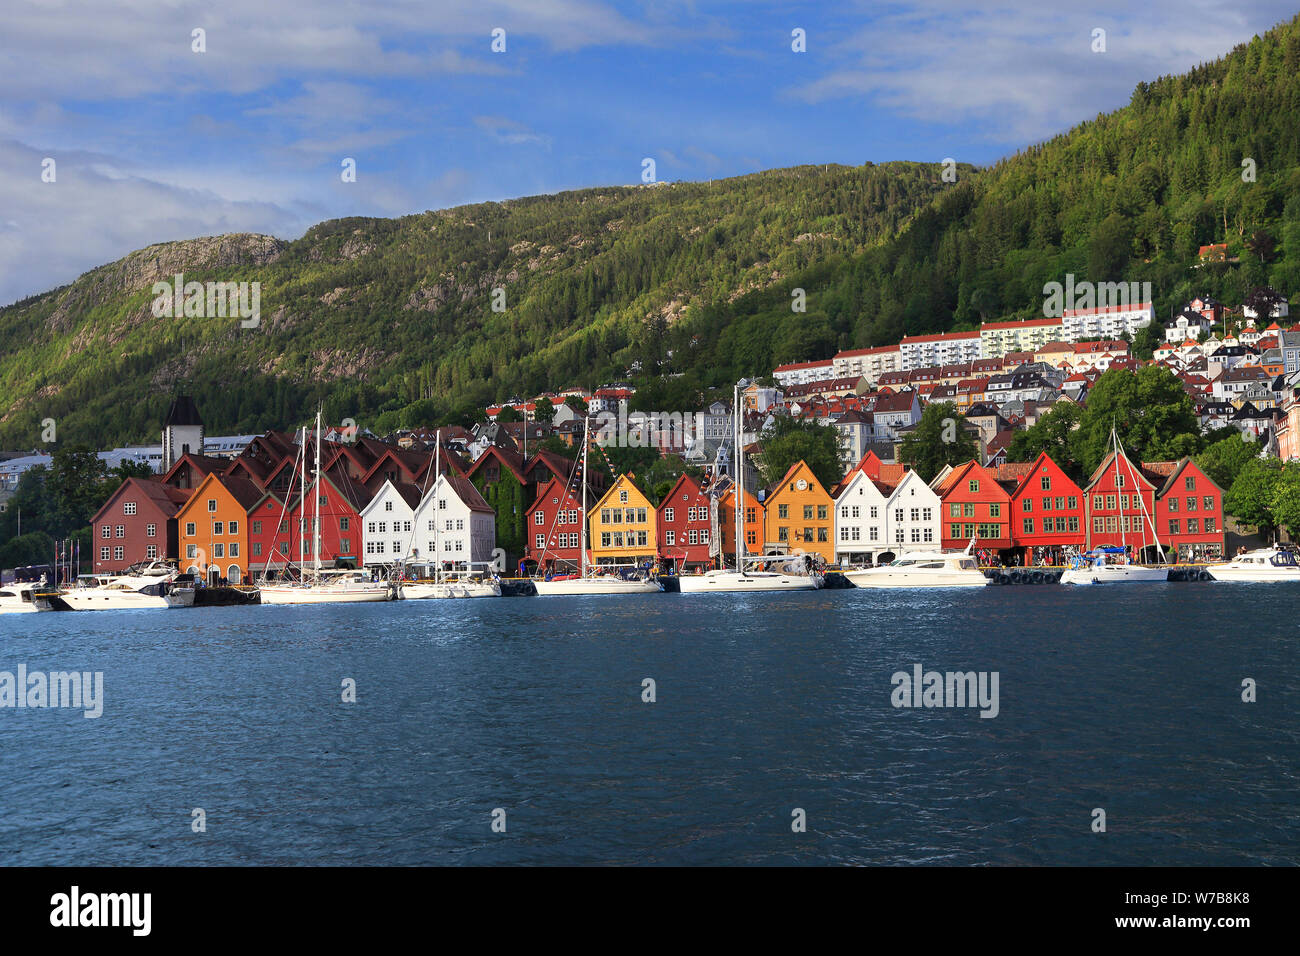 Bergen skyline in Norway. View of historical and colorful buildings in Bryggen and Hanseatic wharf in Bergen, Norway. UNESCO World Heritage Site Stock Photo